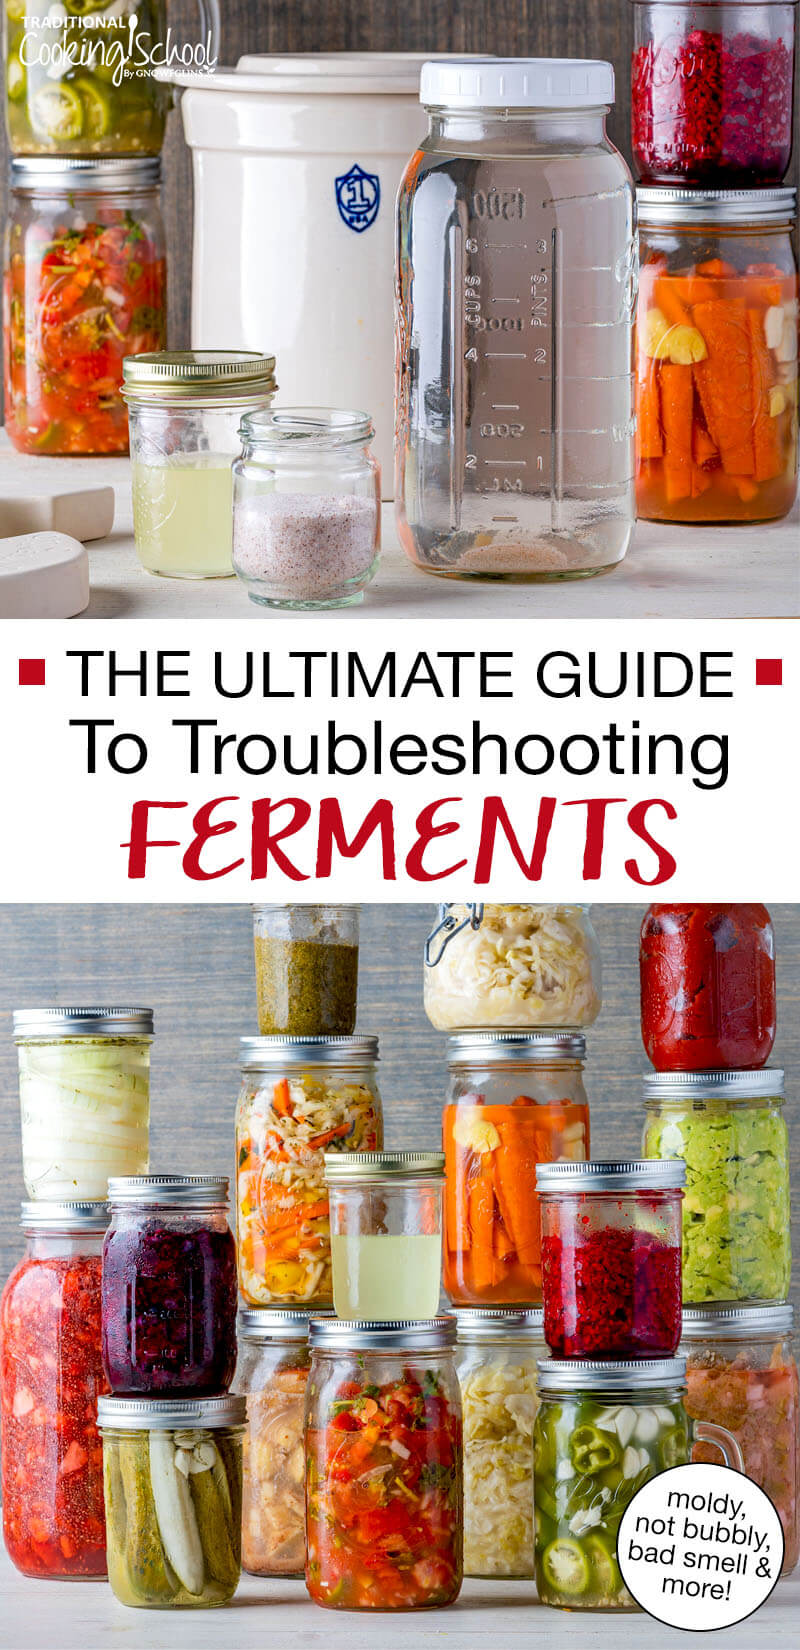 Photo collage of ferments and fermenting supplies. Text overlay says: "The Ultimate Guide To Troubleshooting Ferments (moldy, not bubbly, bad smell & more)"